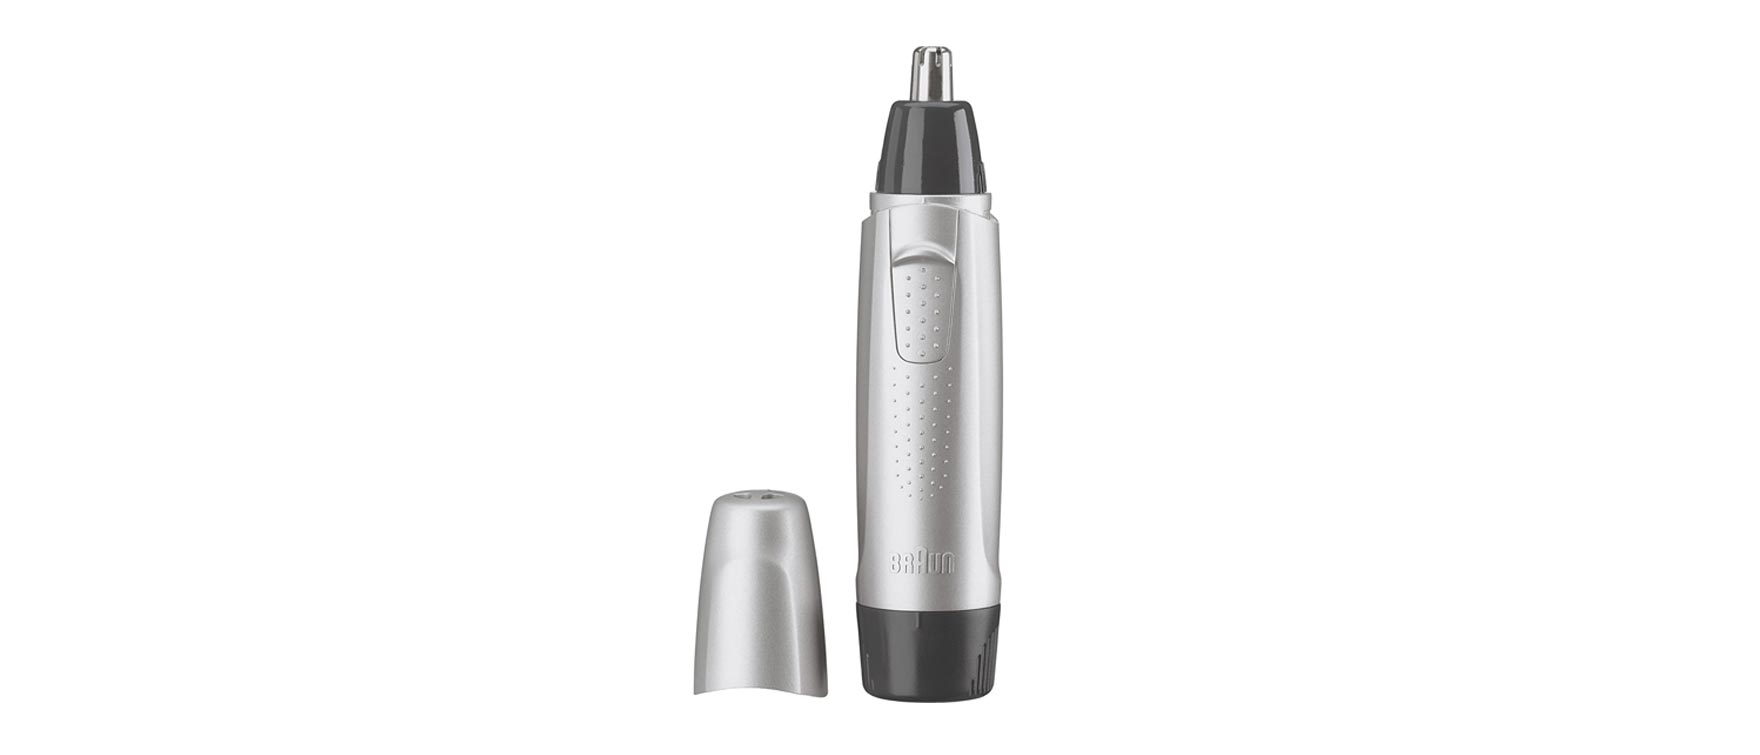 9. Braun Ear and Nose Hair Trimmer